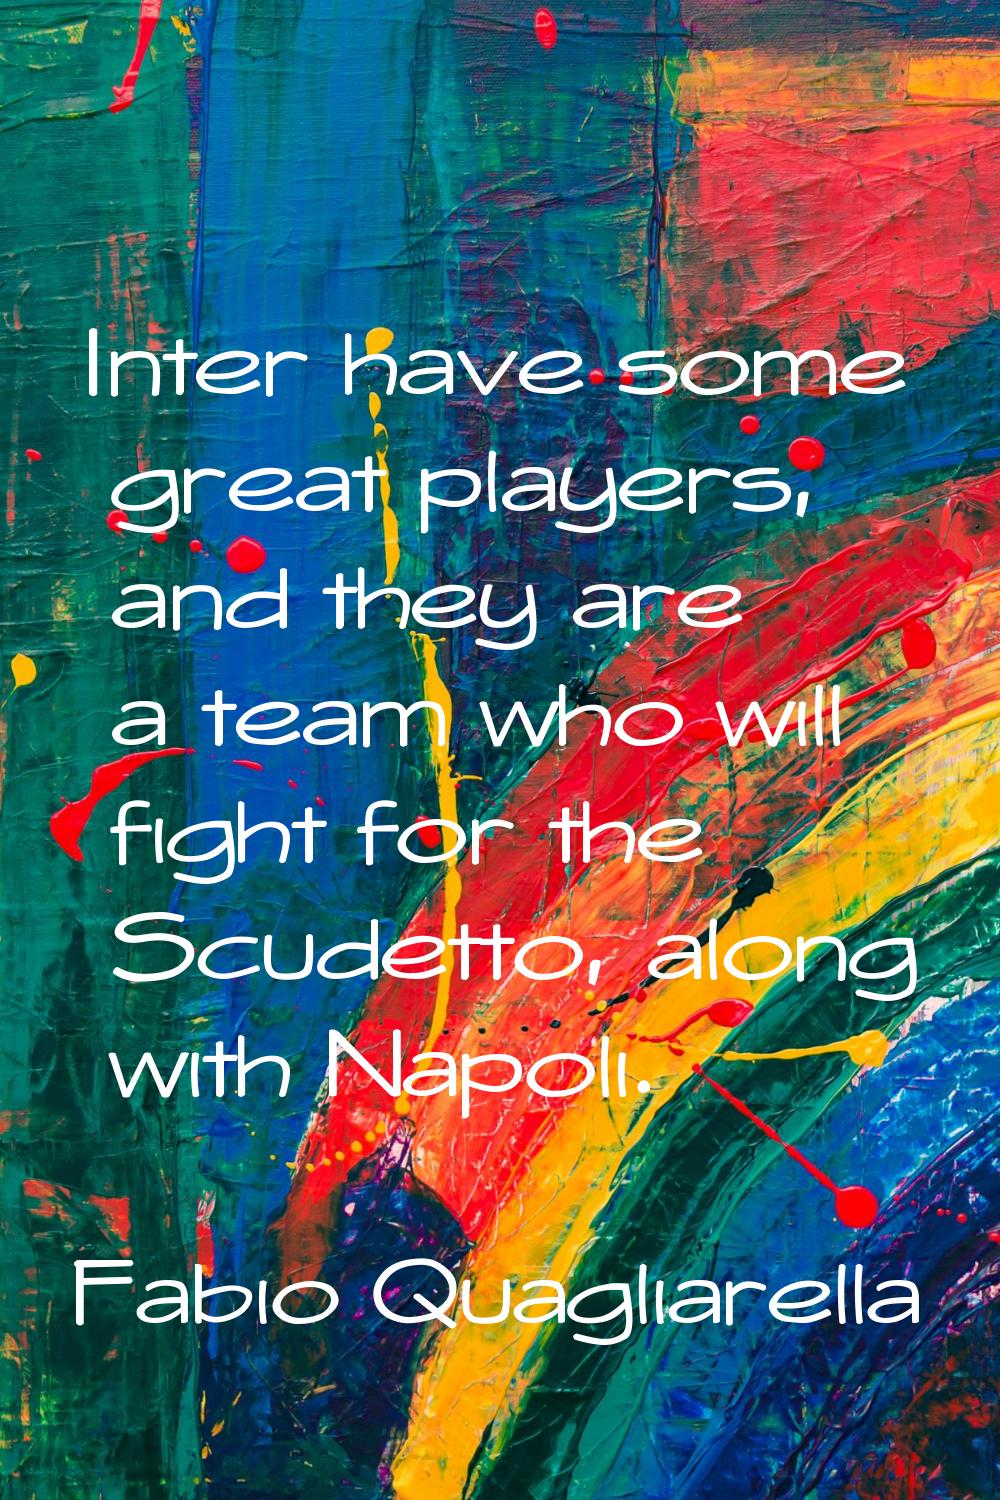 Inter have some great players, and they are a team who will fight for the Scudetto, along with Napo